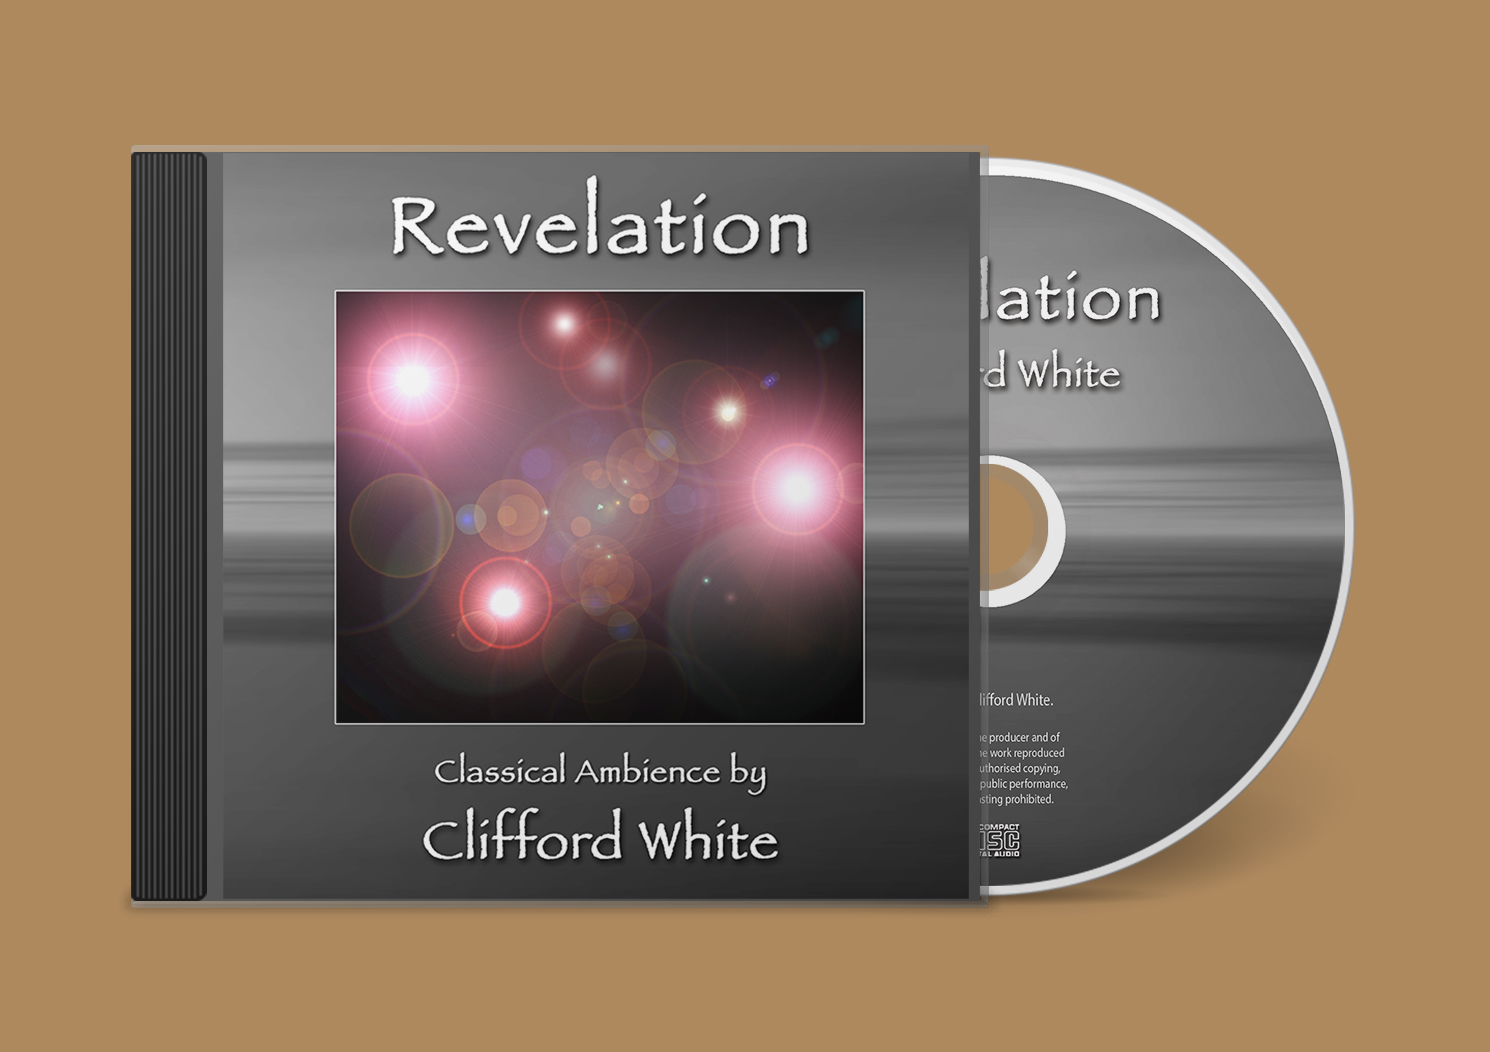 Revelation by Clifford White